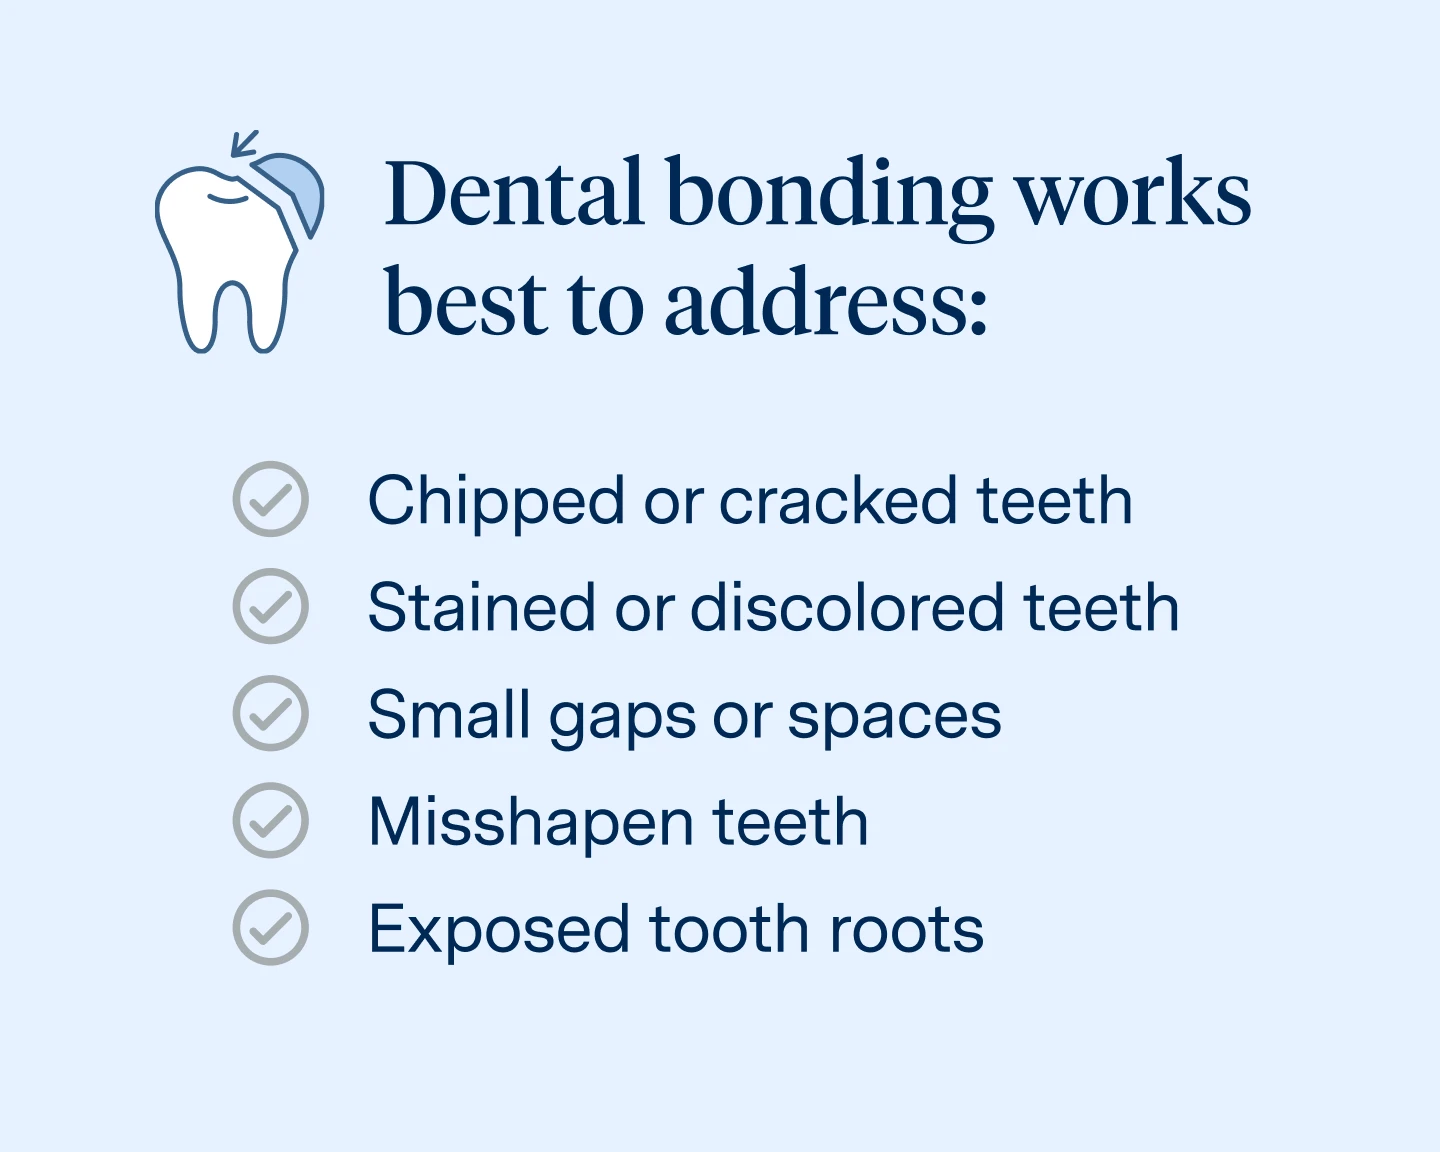 Dental bonding works best to address the following issues:
Chipped or cracked teeth
Stained or discolored teeth
Small gaps or spaces
Misshapen teeth
Exposed tooth roots